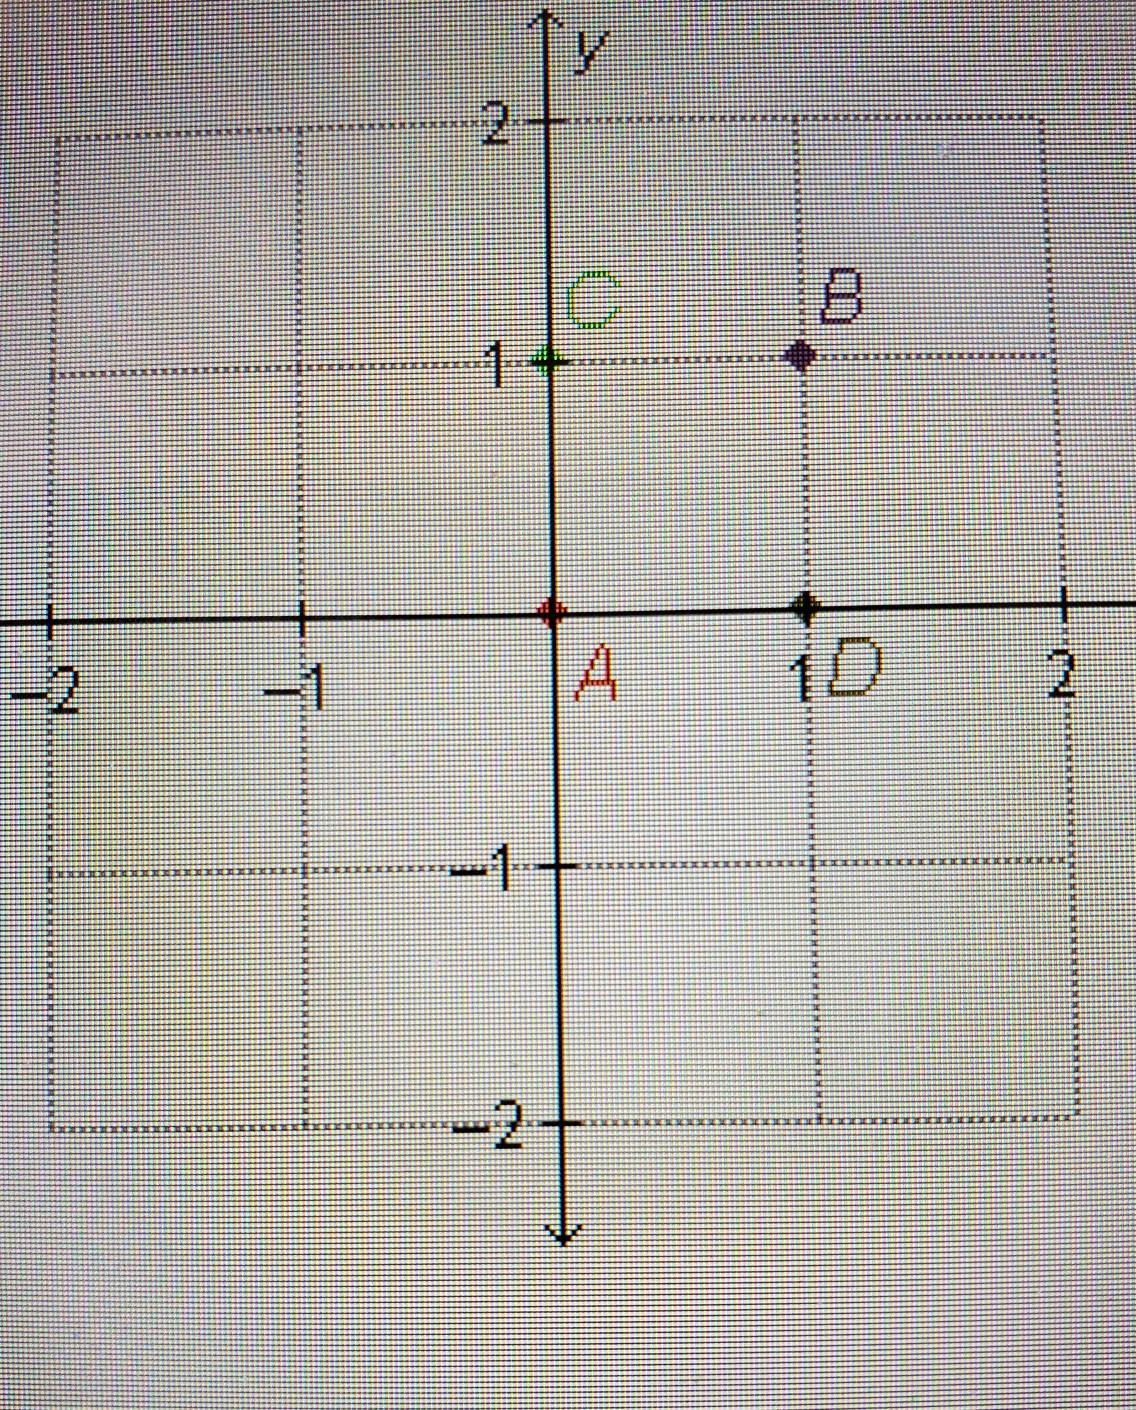 Which Point Is Located At The Origin?